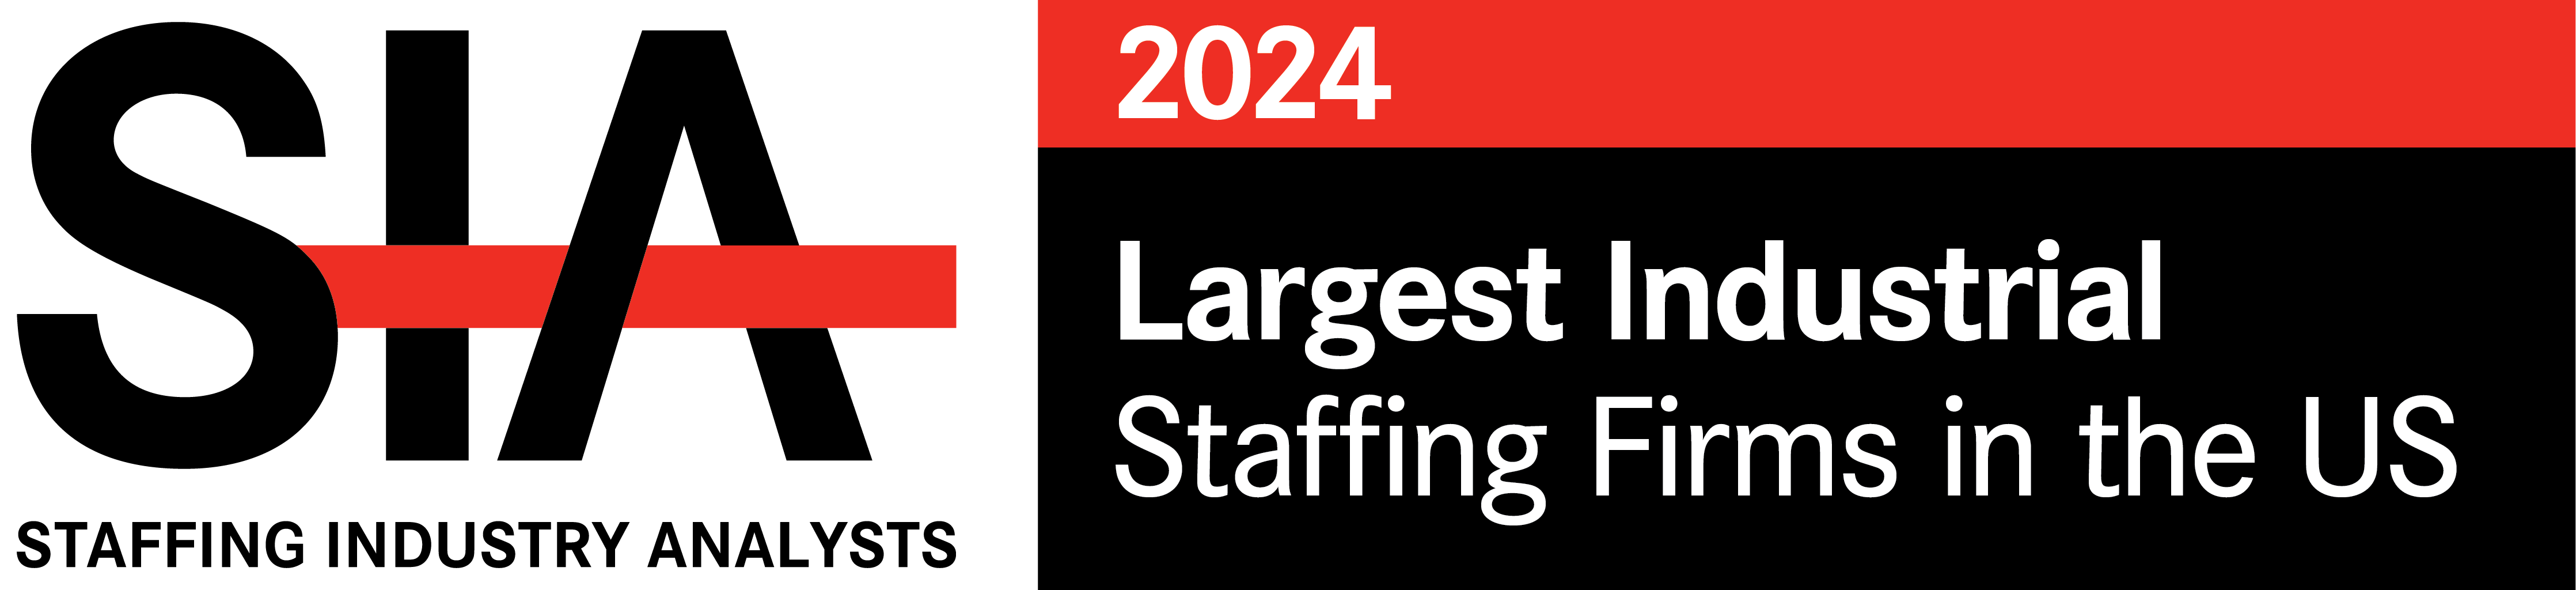 SIA 2024 Largest Industrial Staffing Firms - US